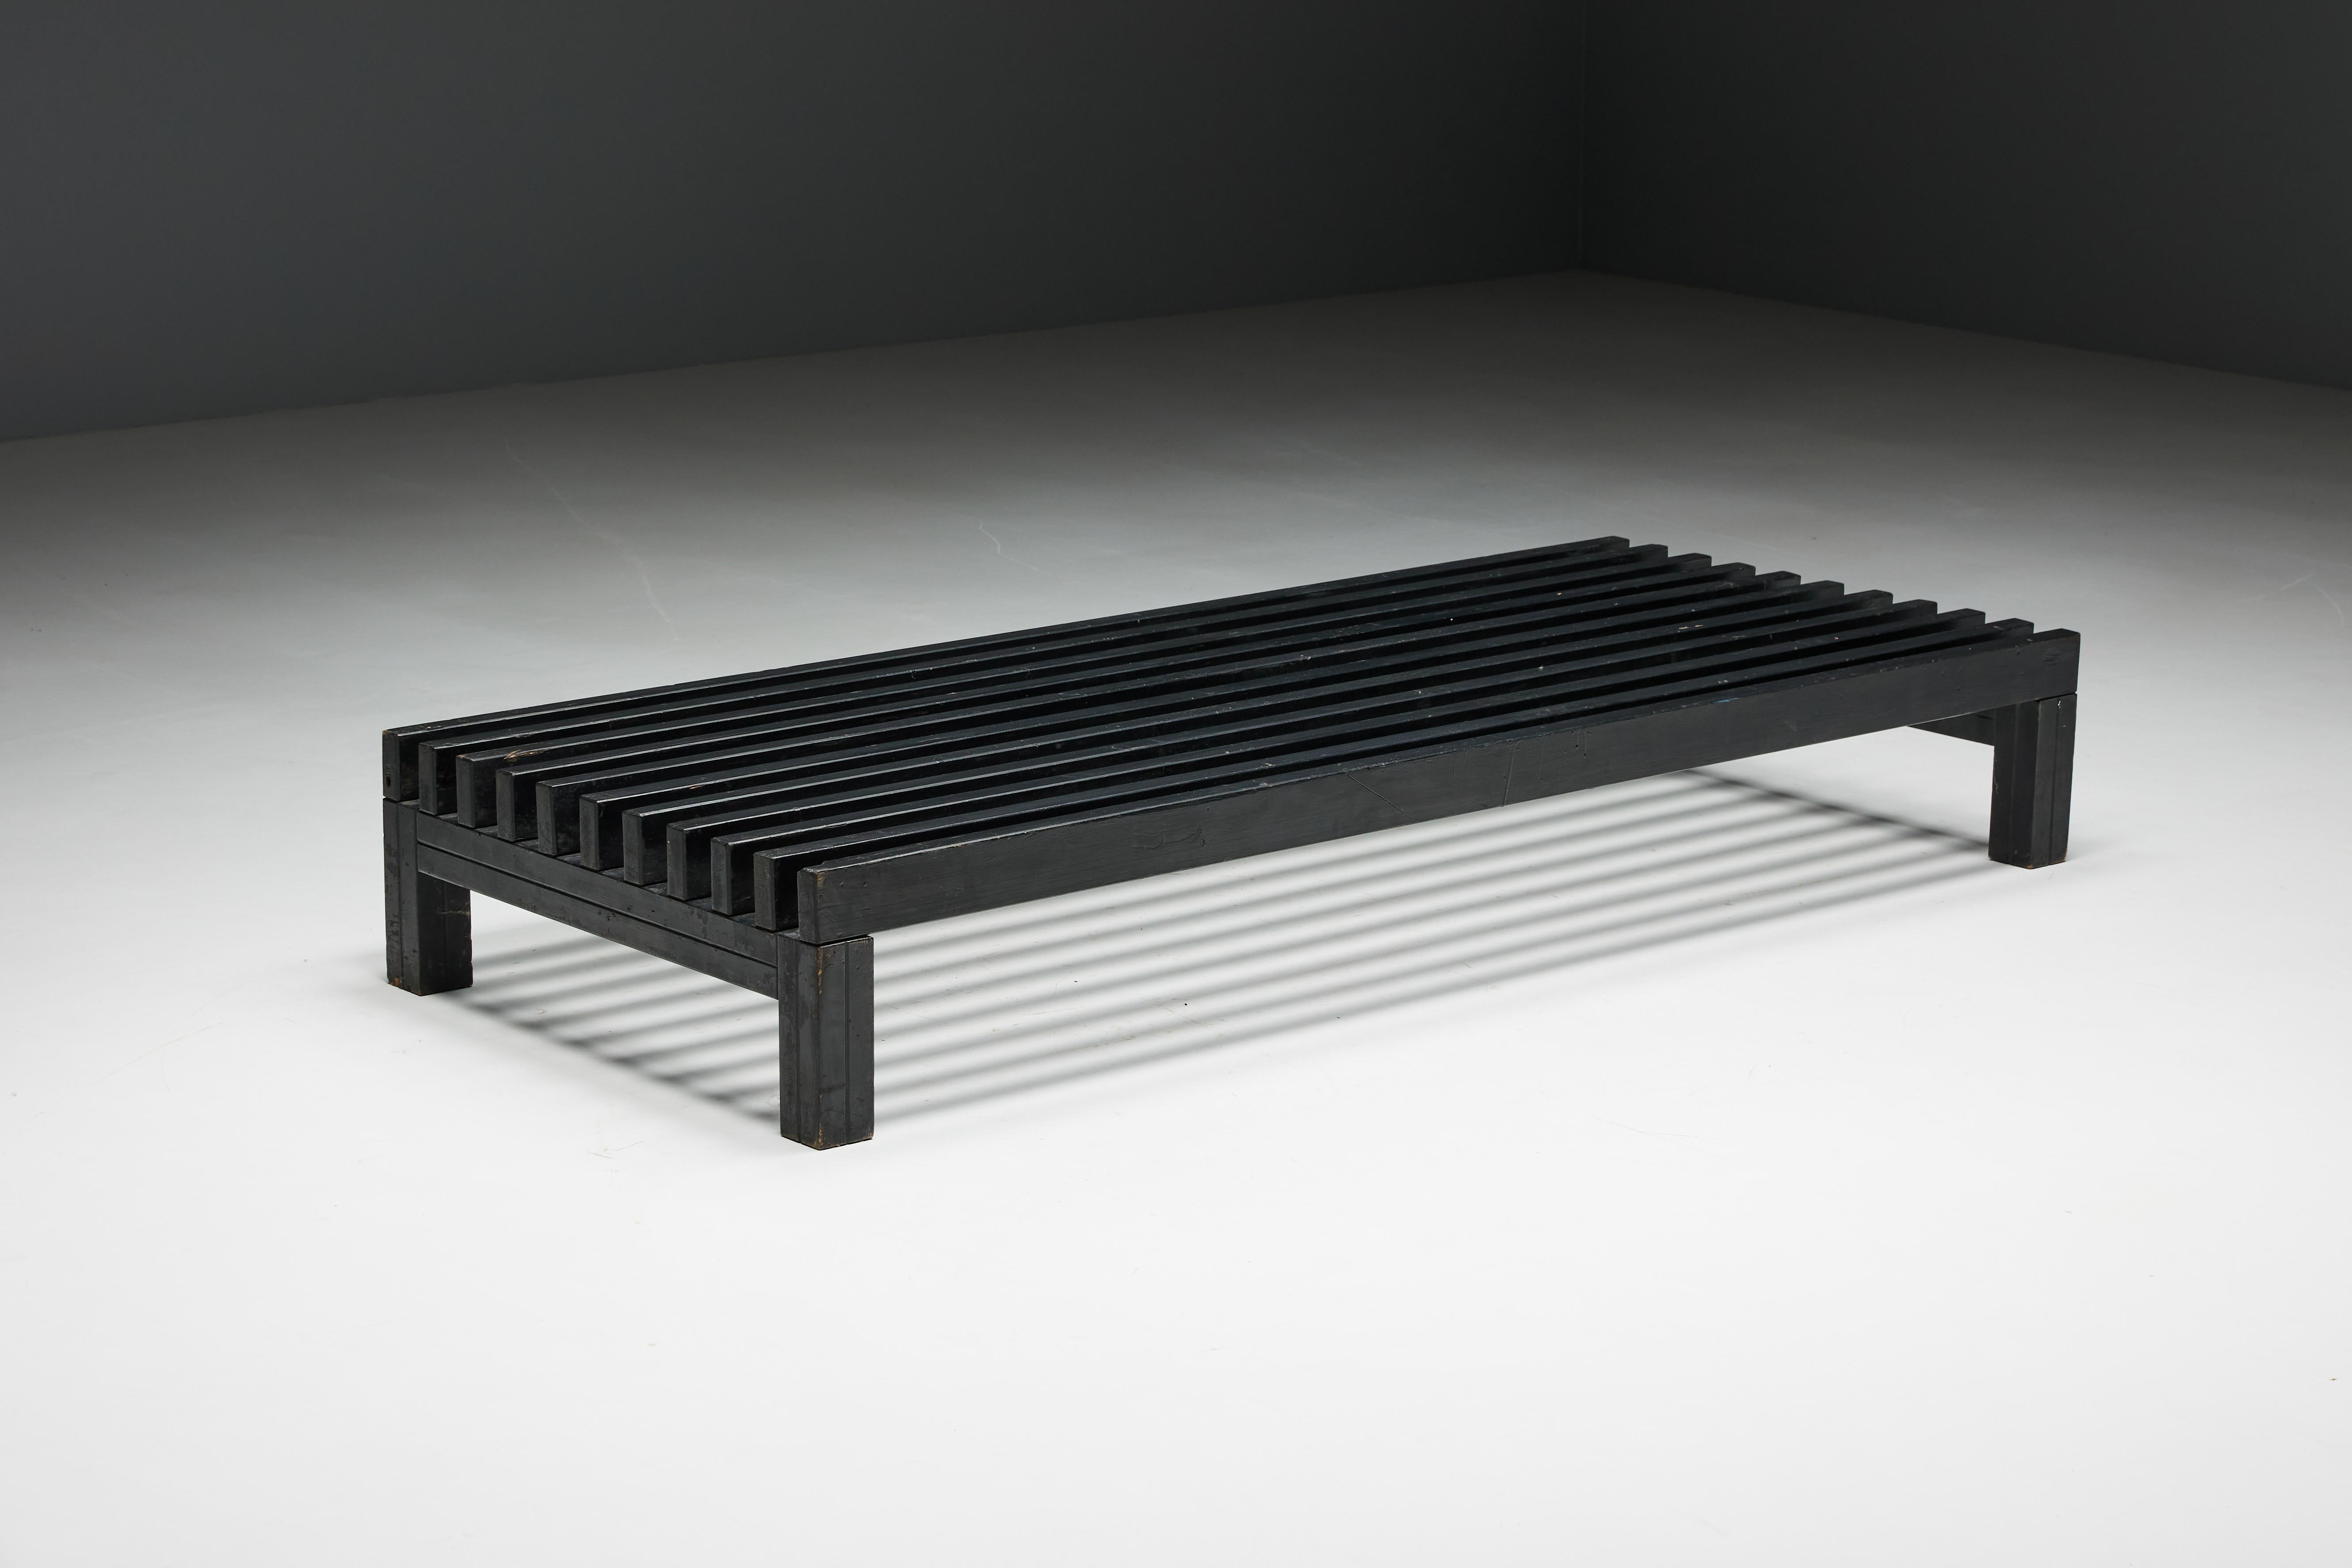 European Mid-Century Slatted Bench or Coffee Table, France, 1960s For Sale